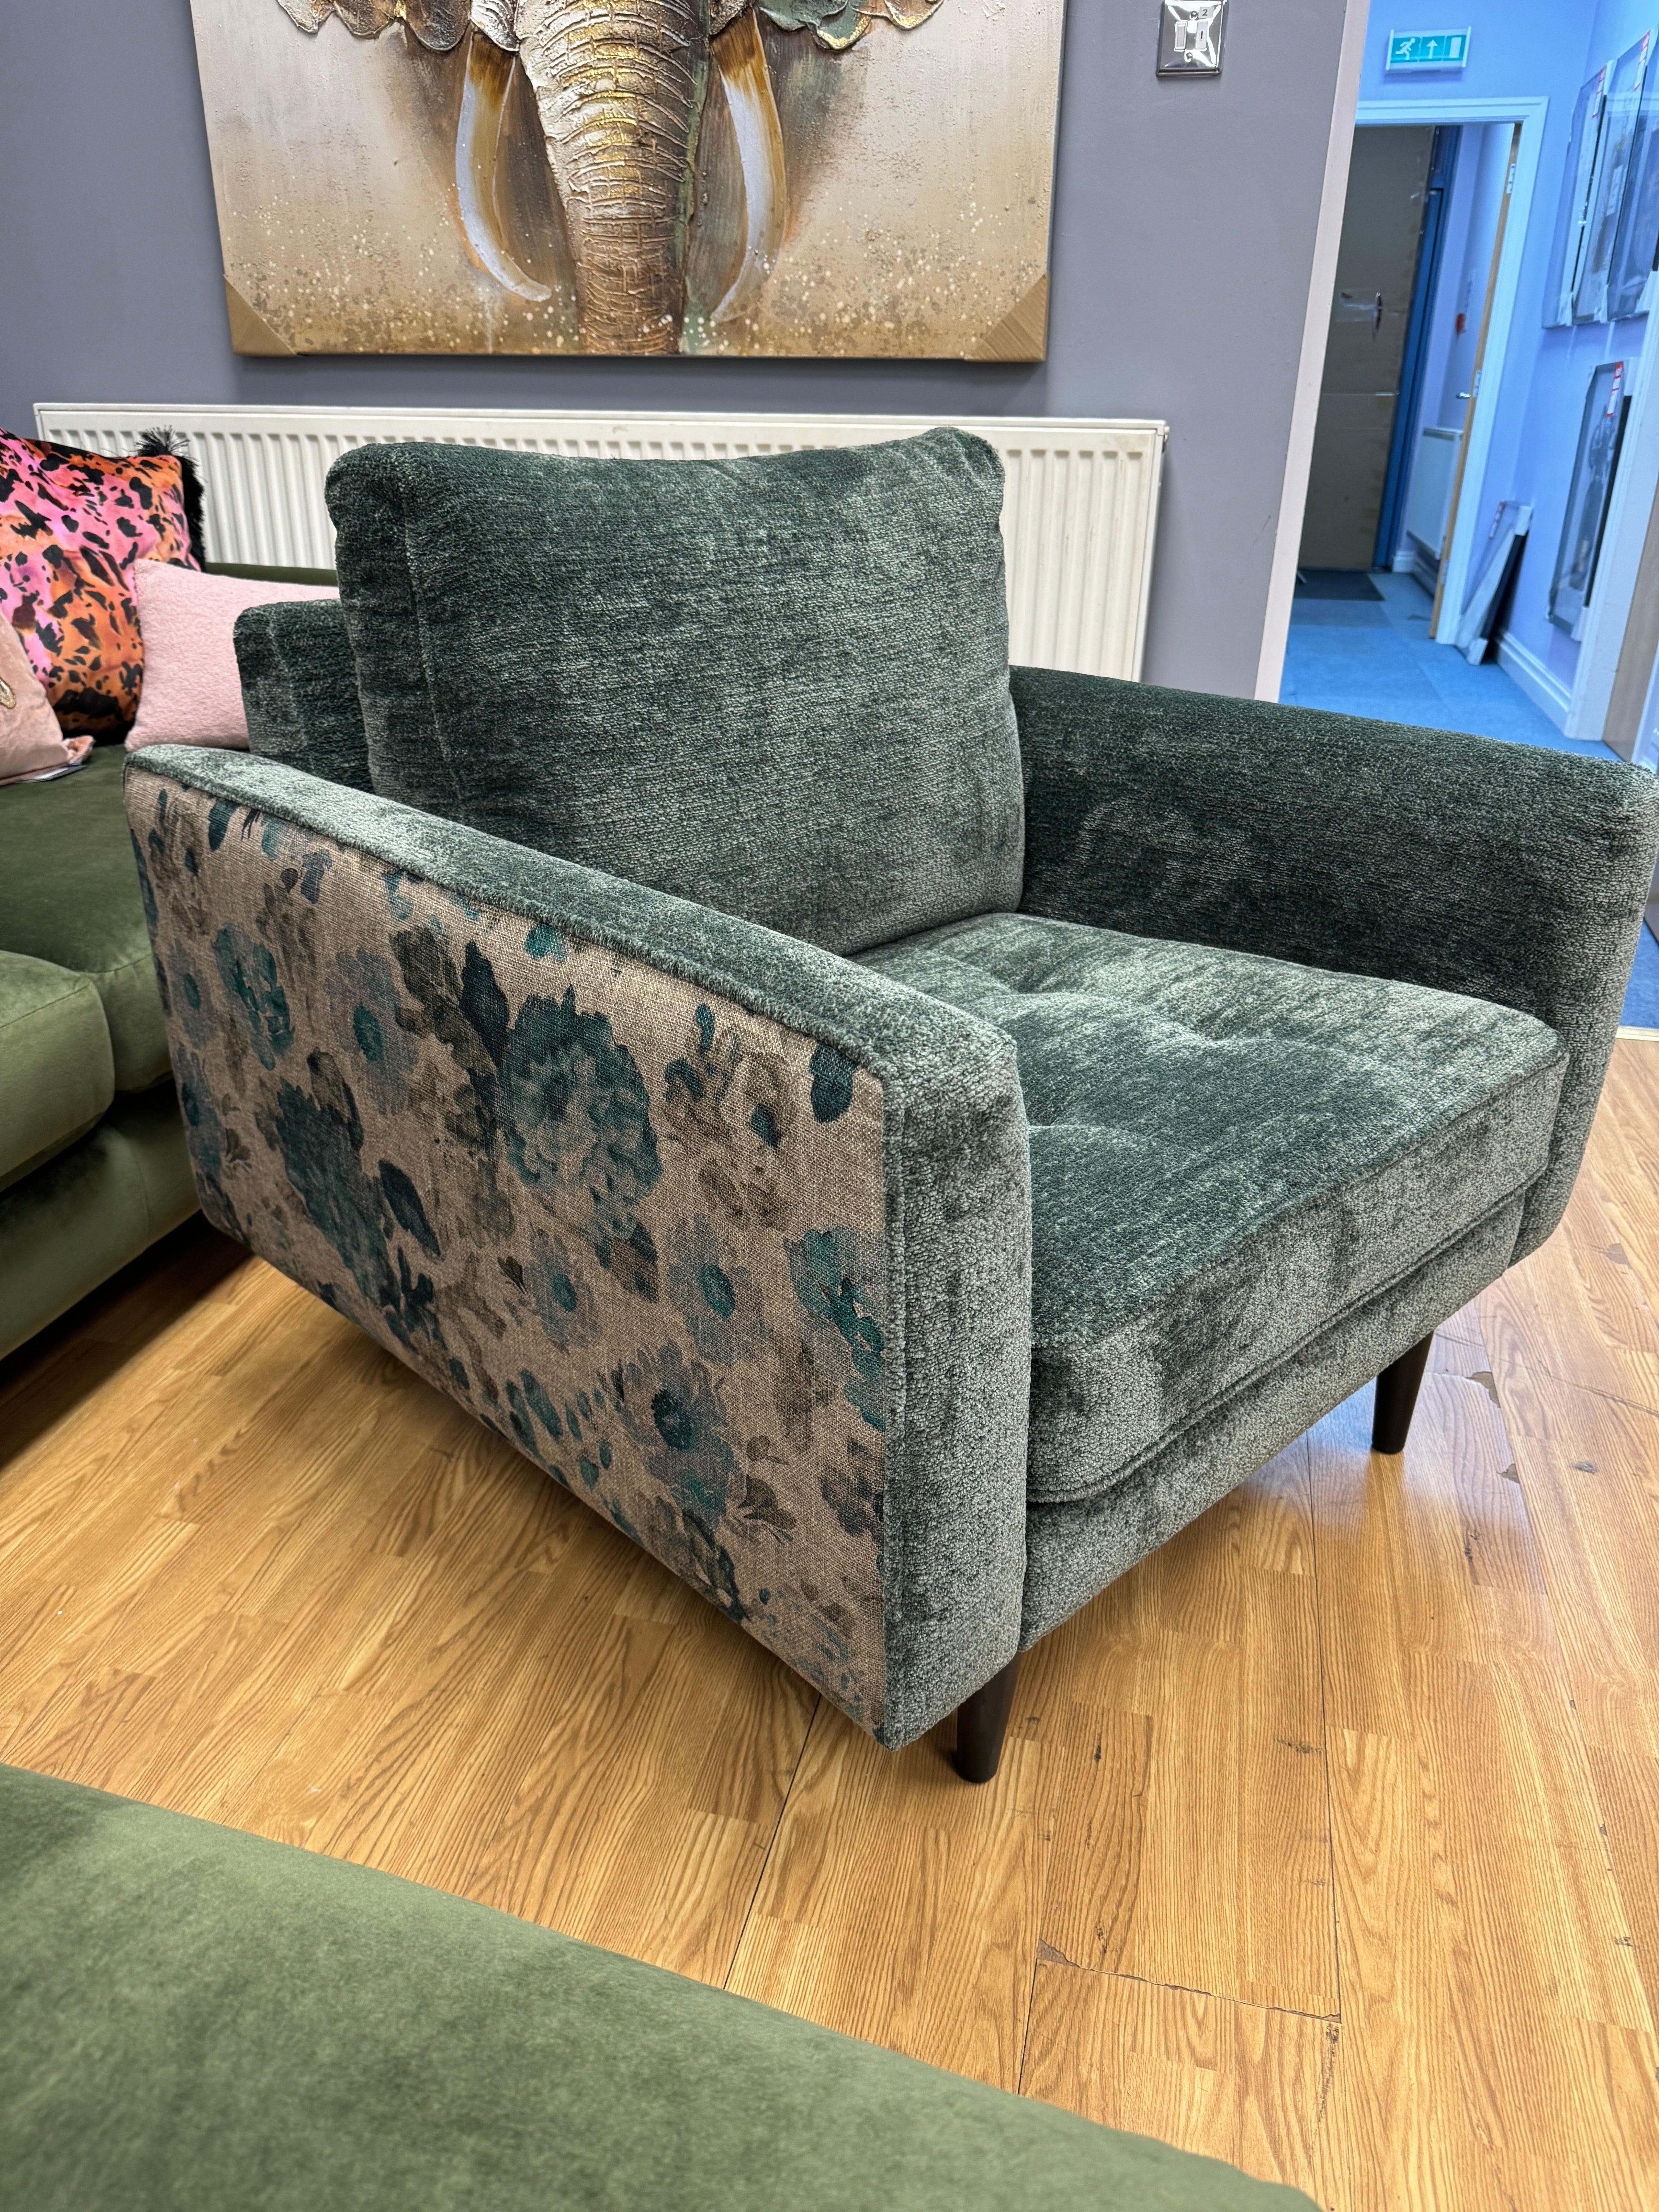 G PLAN x JAY BLADES RIDLEY armchair in Dark green chenille with contrasting floral linen side panels